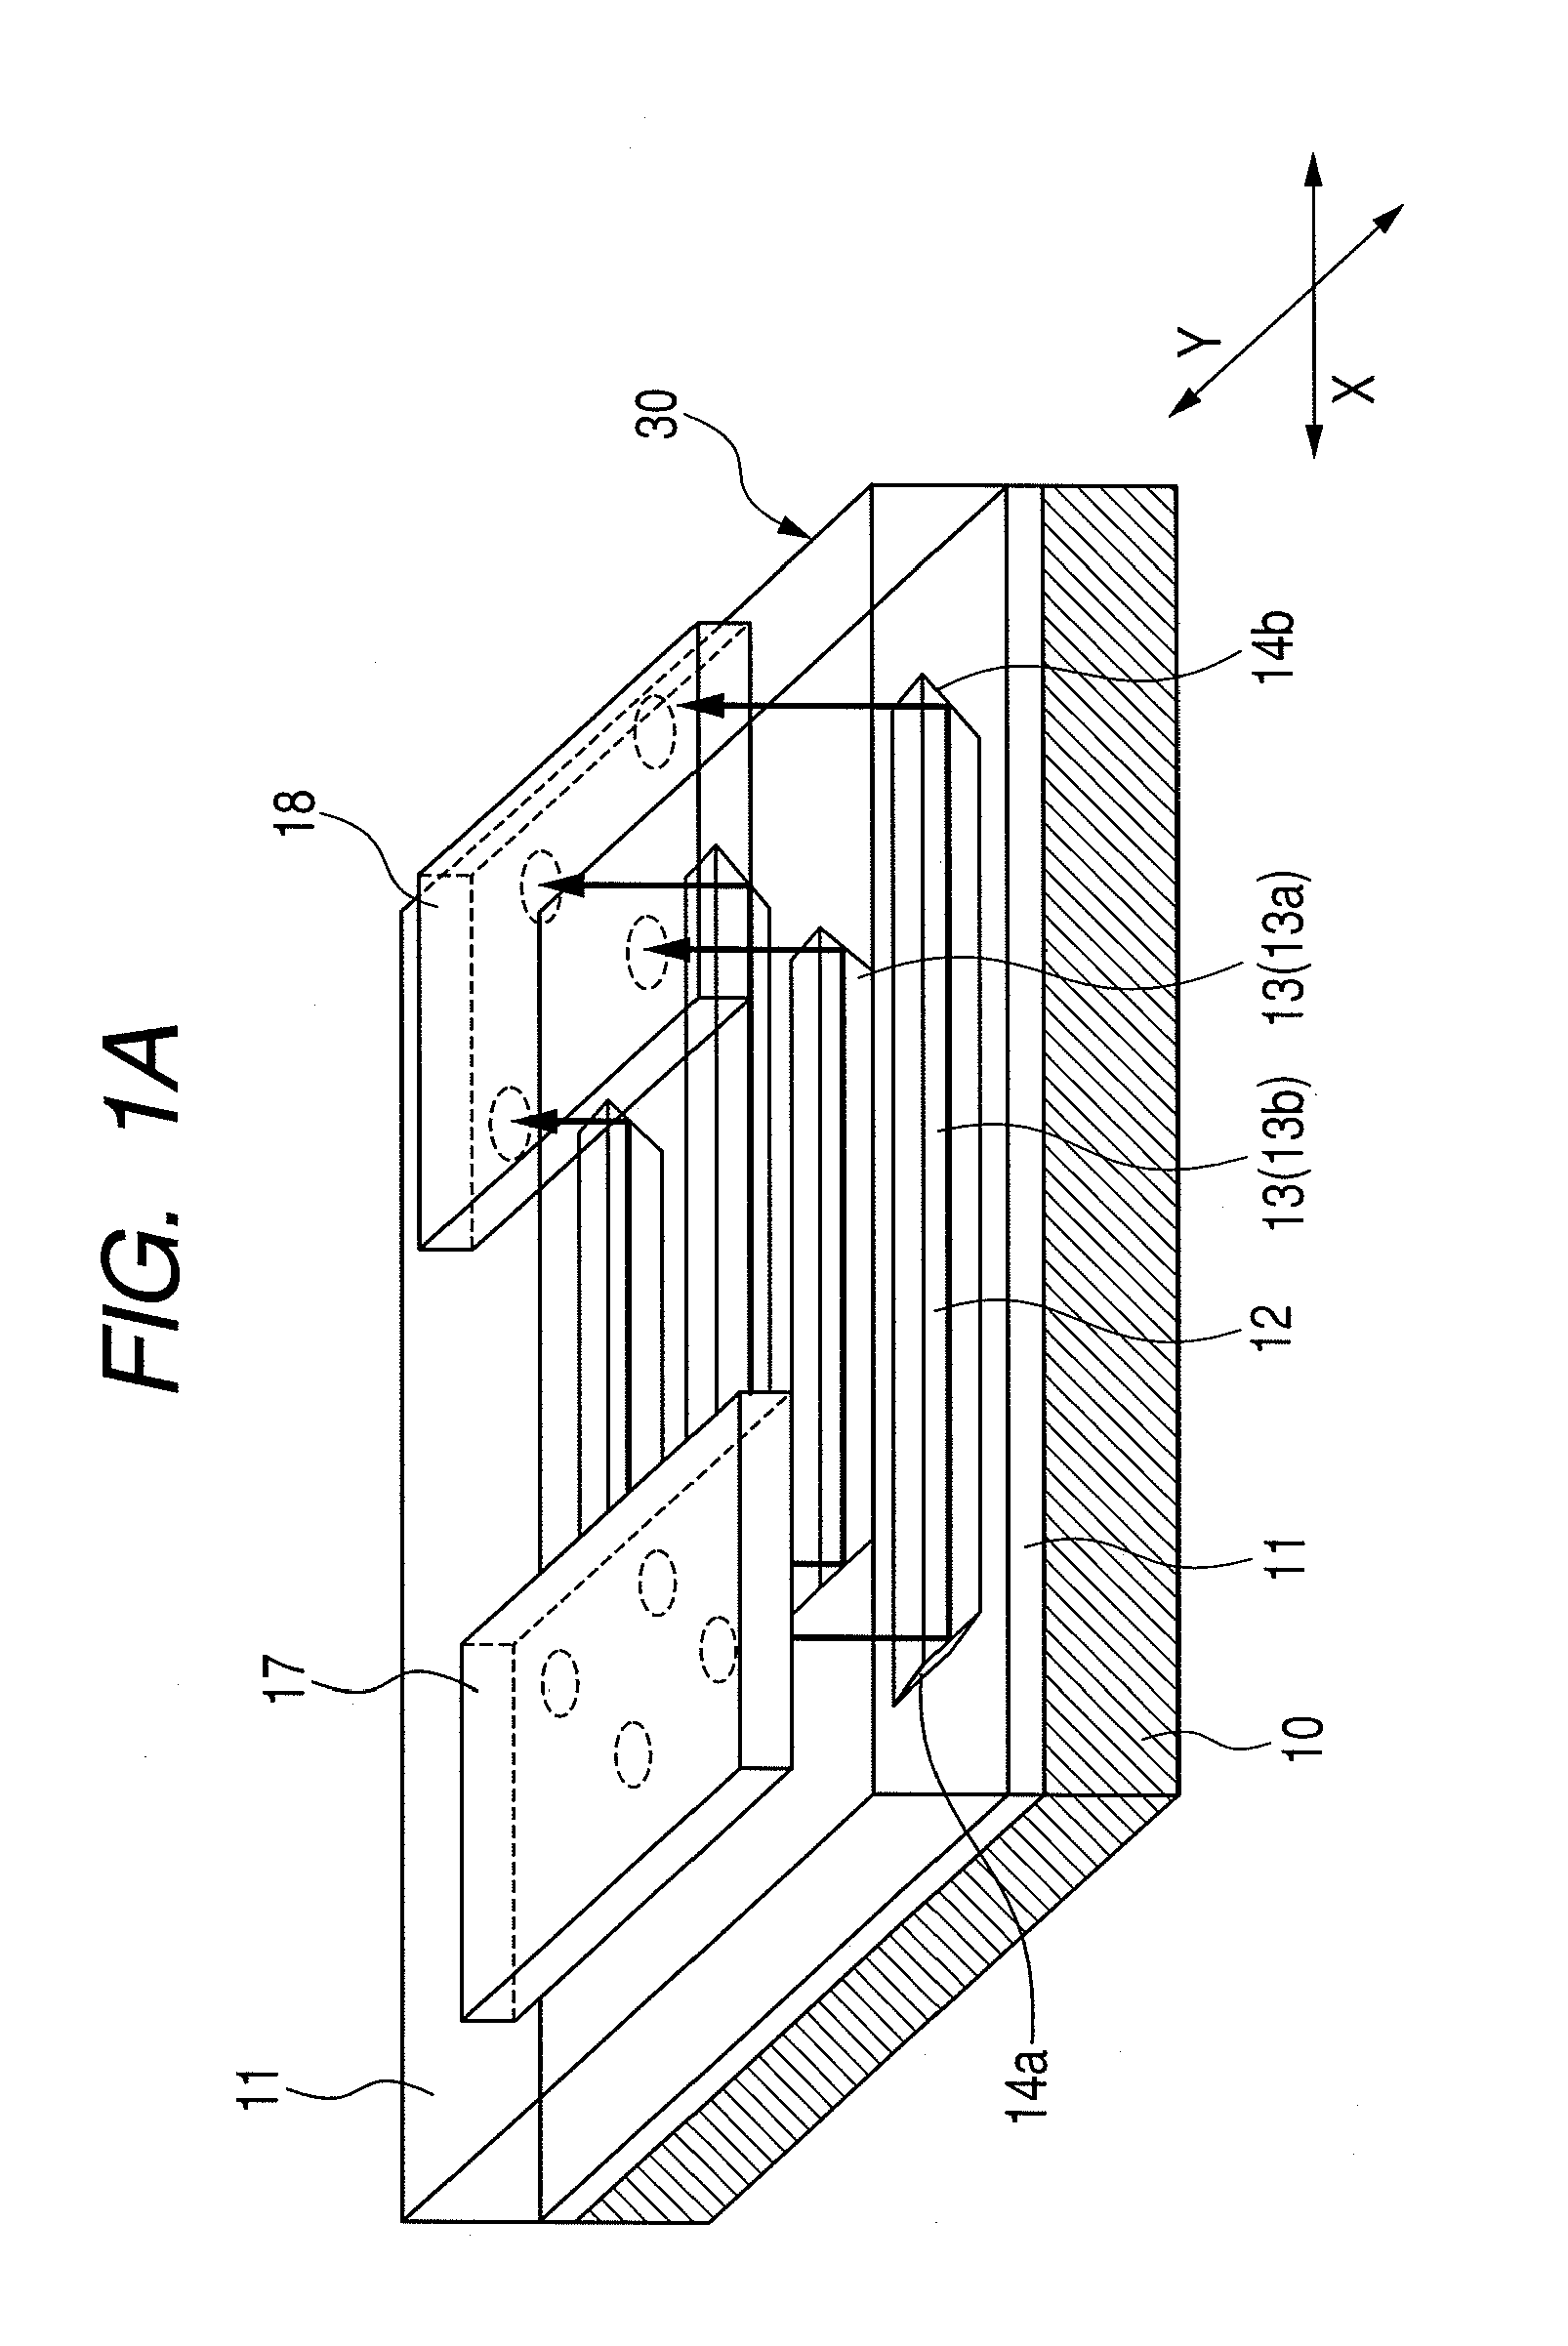 Optical interconnection assembled circuit